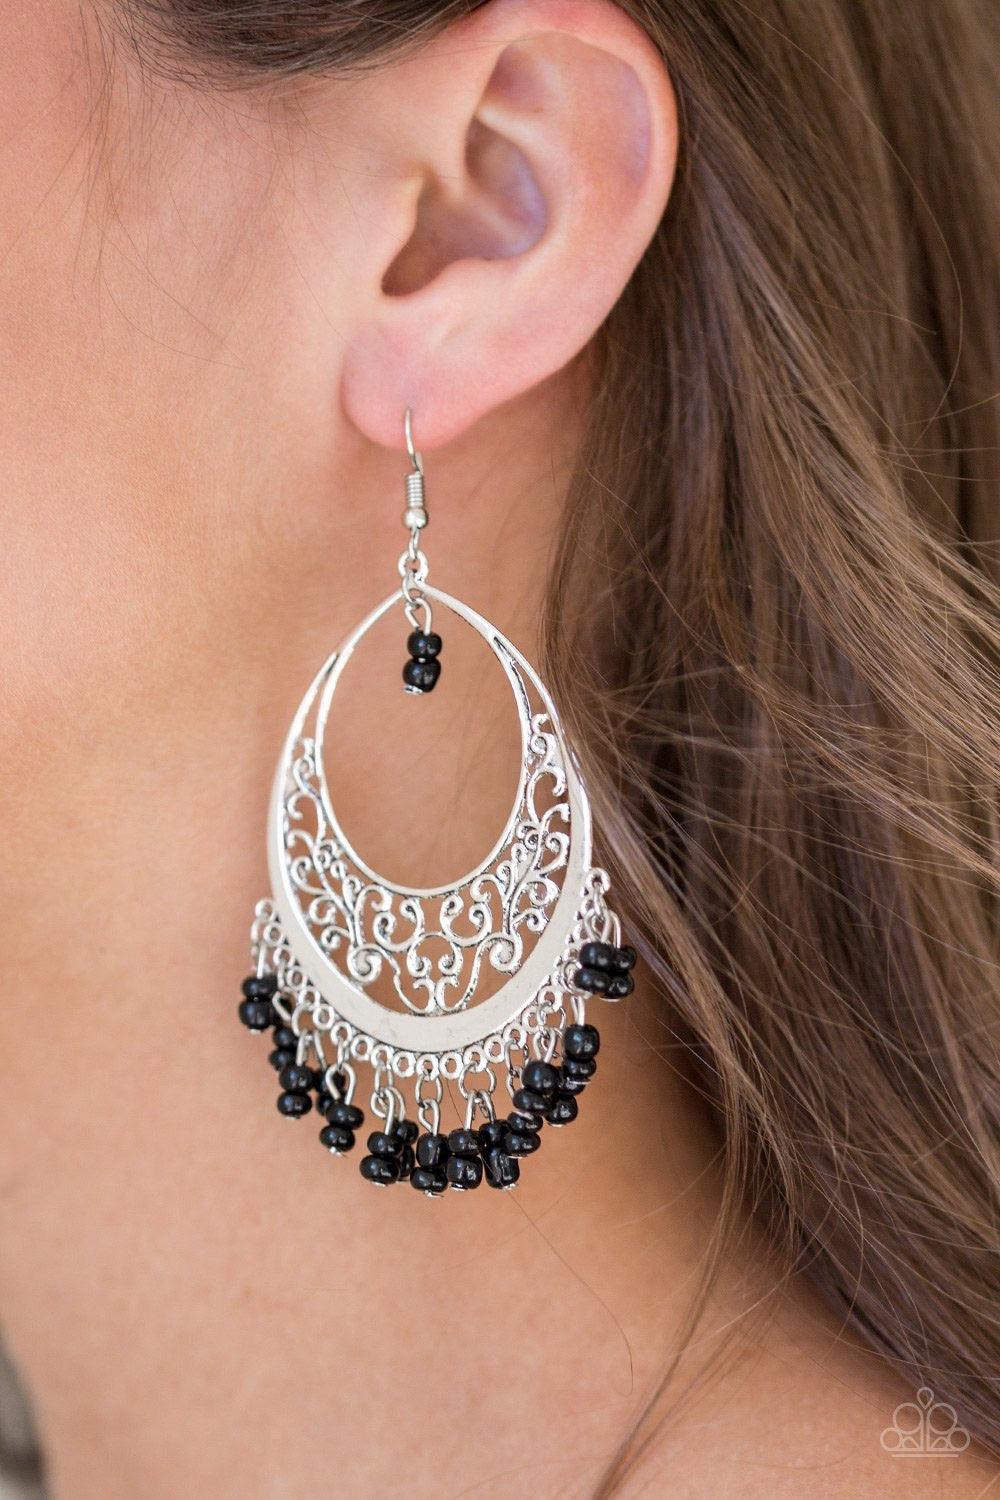 Paparazzi Accessories Malibu Mamba - Black Pairs of black seed beads swing from the bottom of a glistening silver teardrop radiating with filigree detail, creating a colorful fringe. Earring attaches to a standard fishhook fitting.Sold as one pair of earr